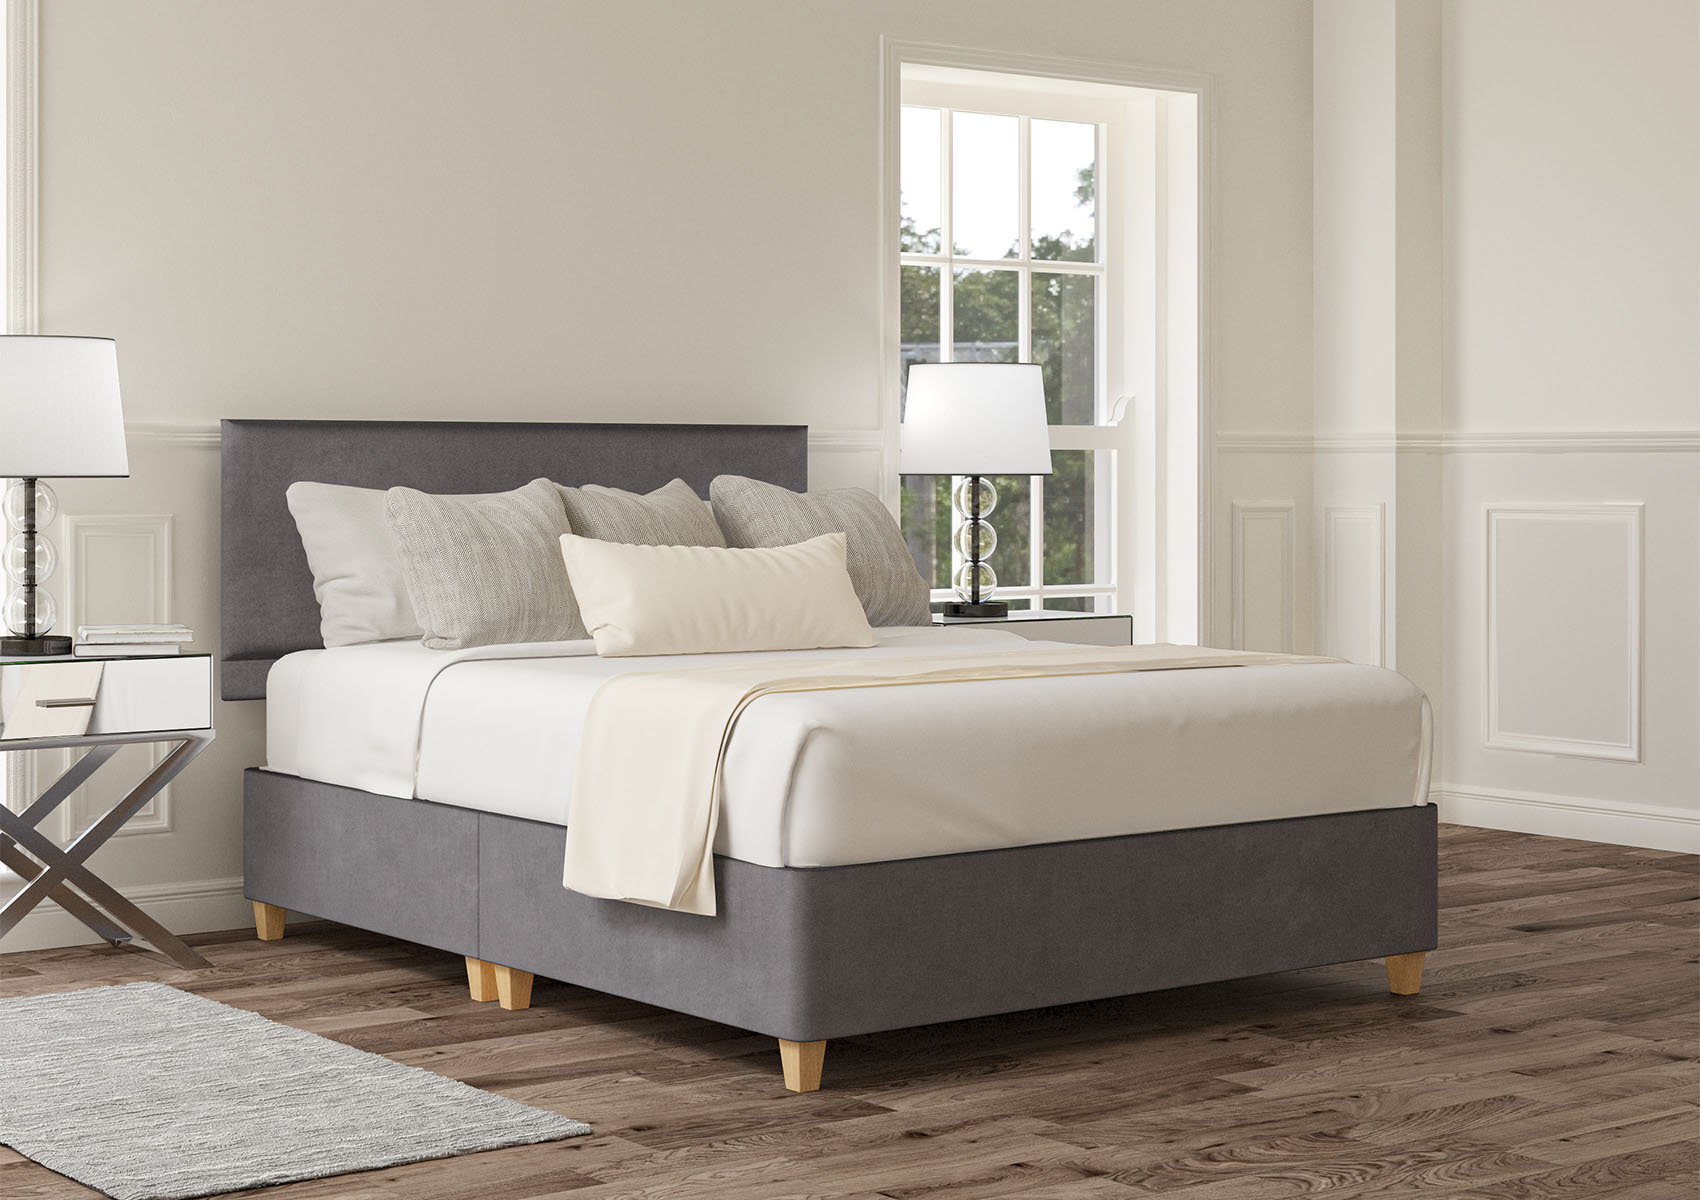 View Henley Naples Cream Upholstered King Size Bed Time4Sleep information